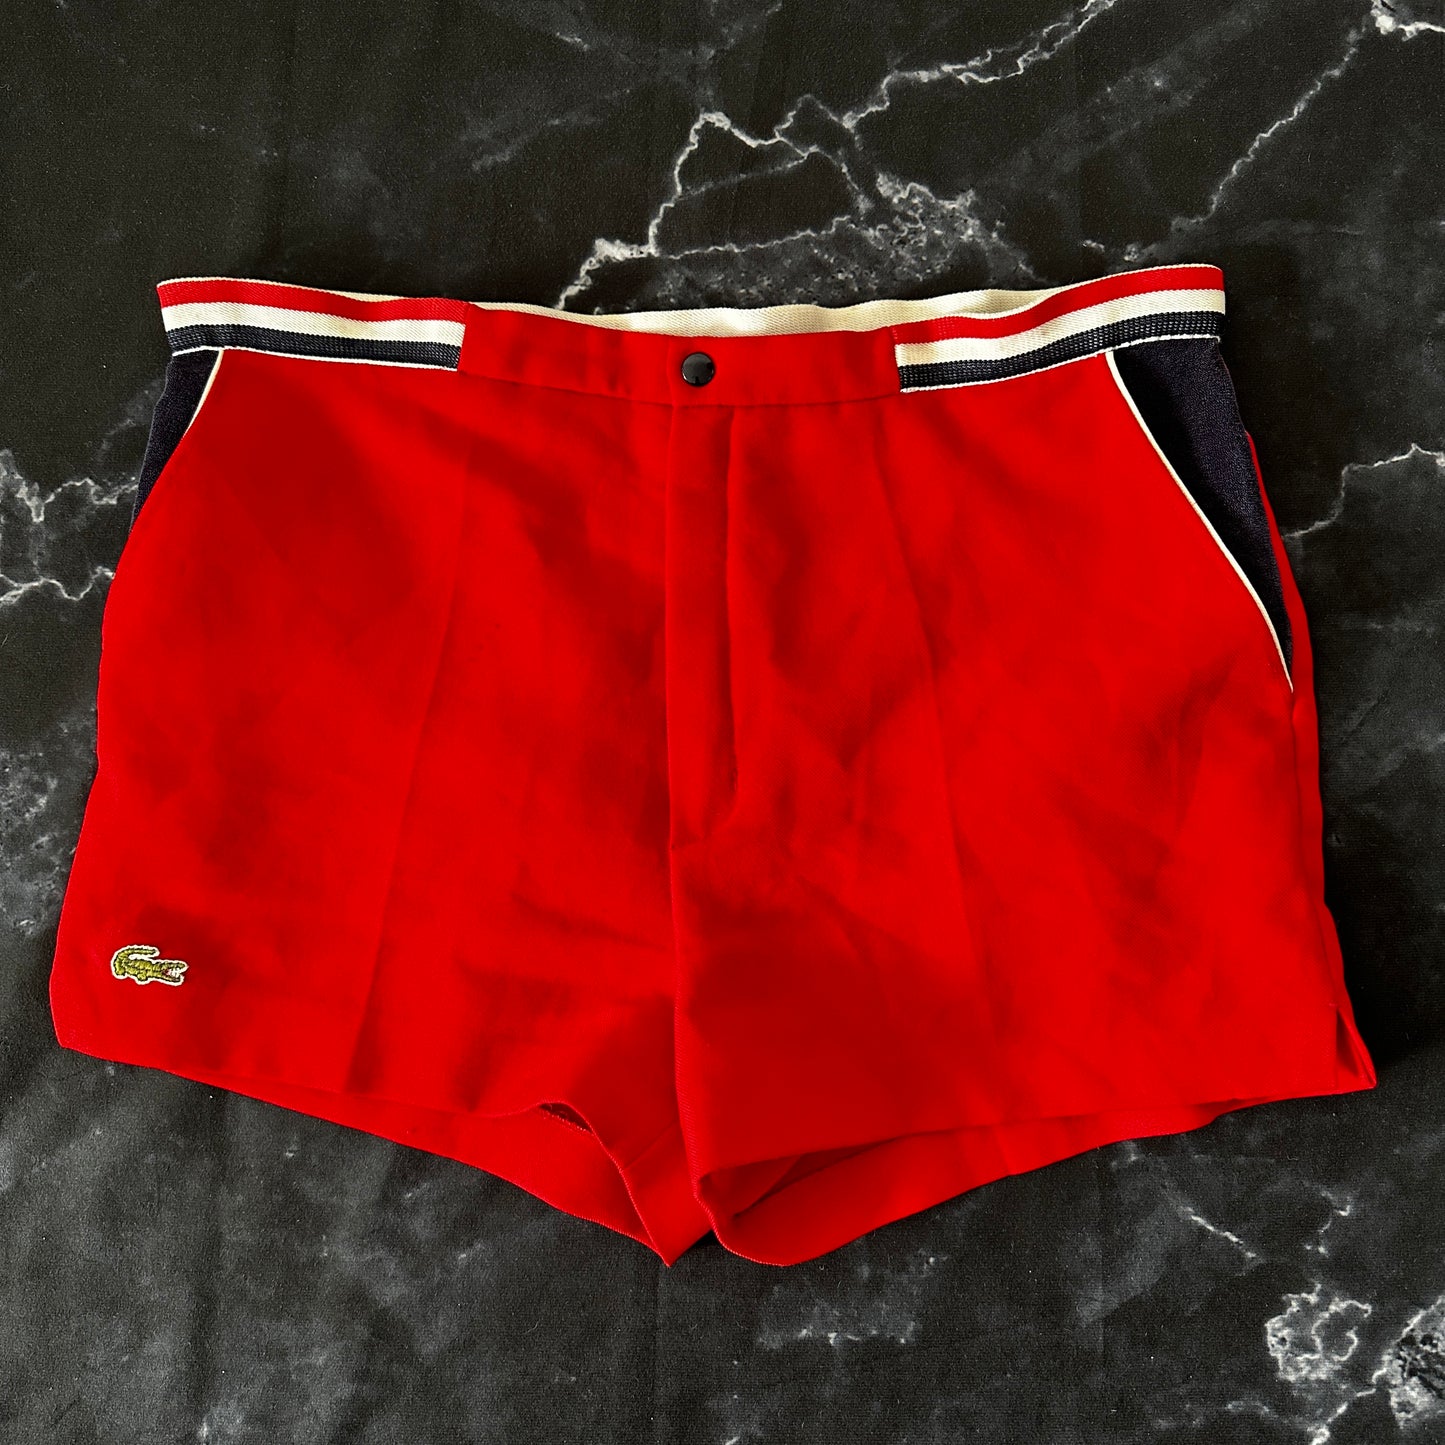 Lacoste 80s Vintage Tennis Shorts - 52 / L - Made in France